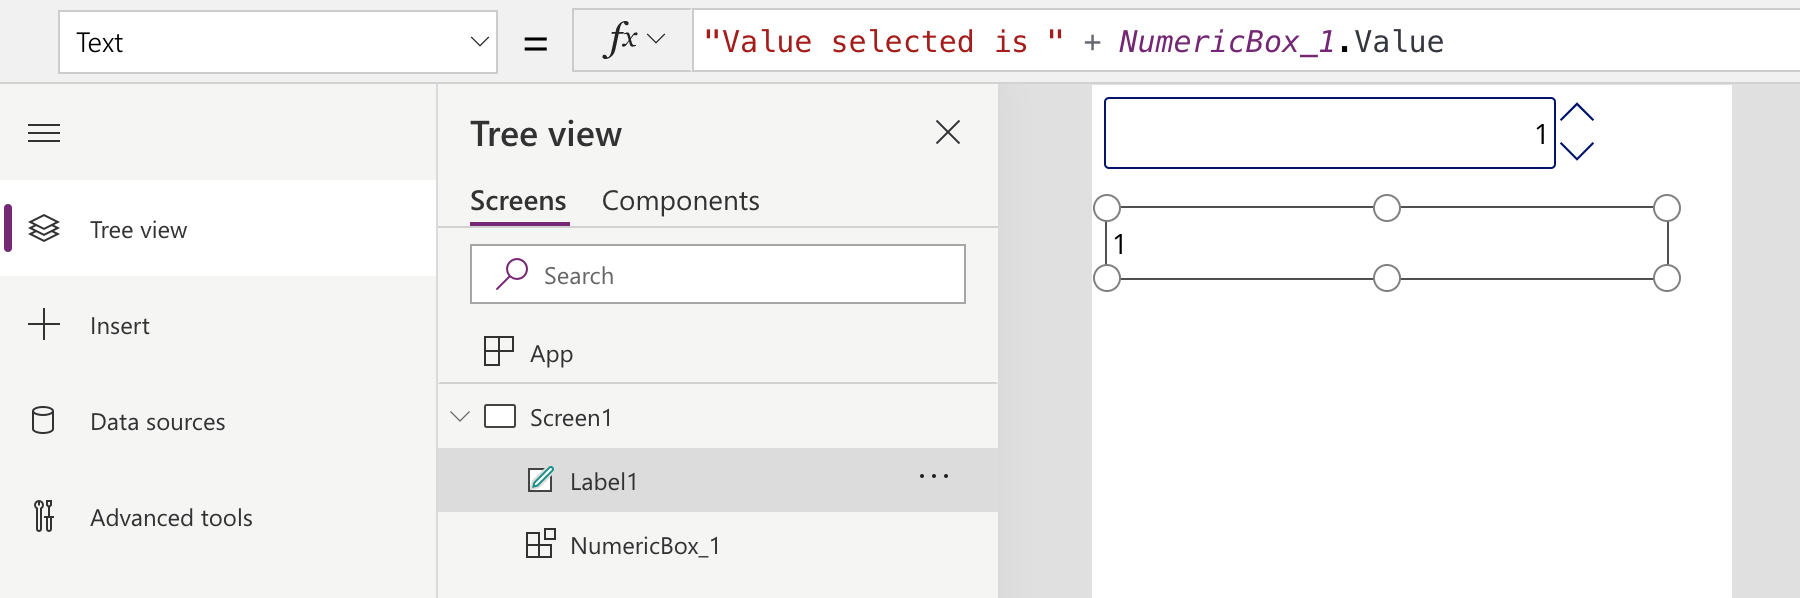 Canvas Components in PowerApps